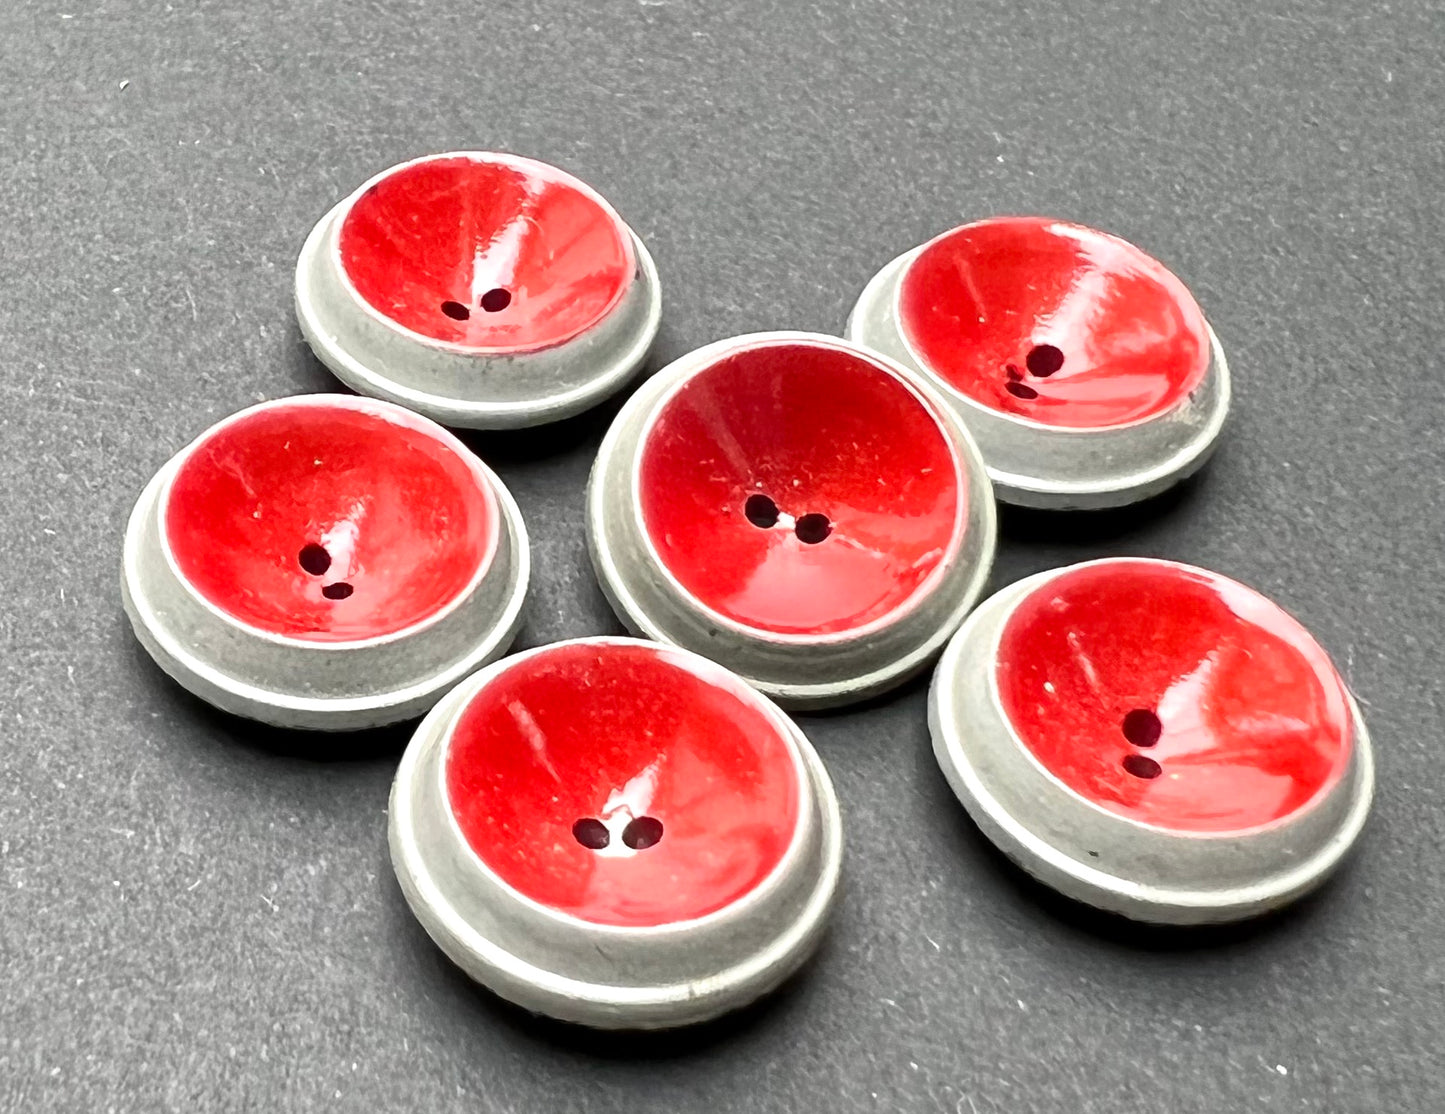 6 Striking 1960s Italian Light Grey and Dark Red Vintage 1.5cm Buttons